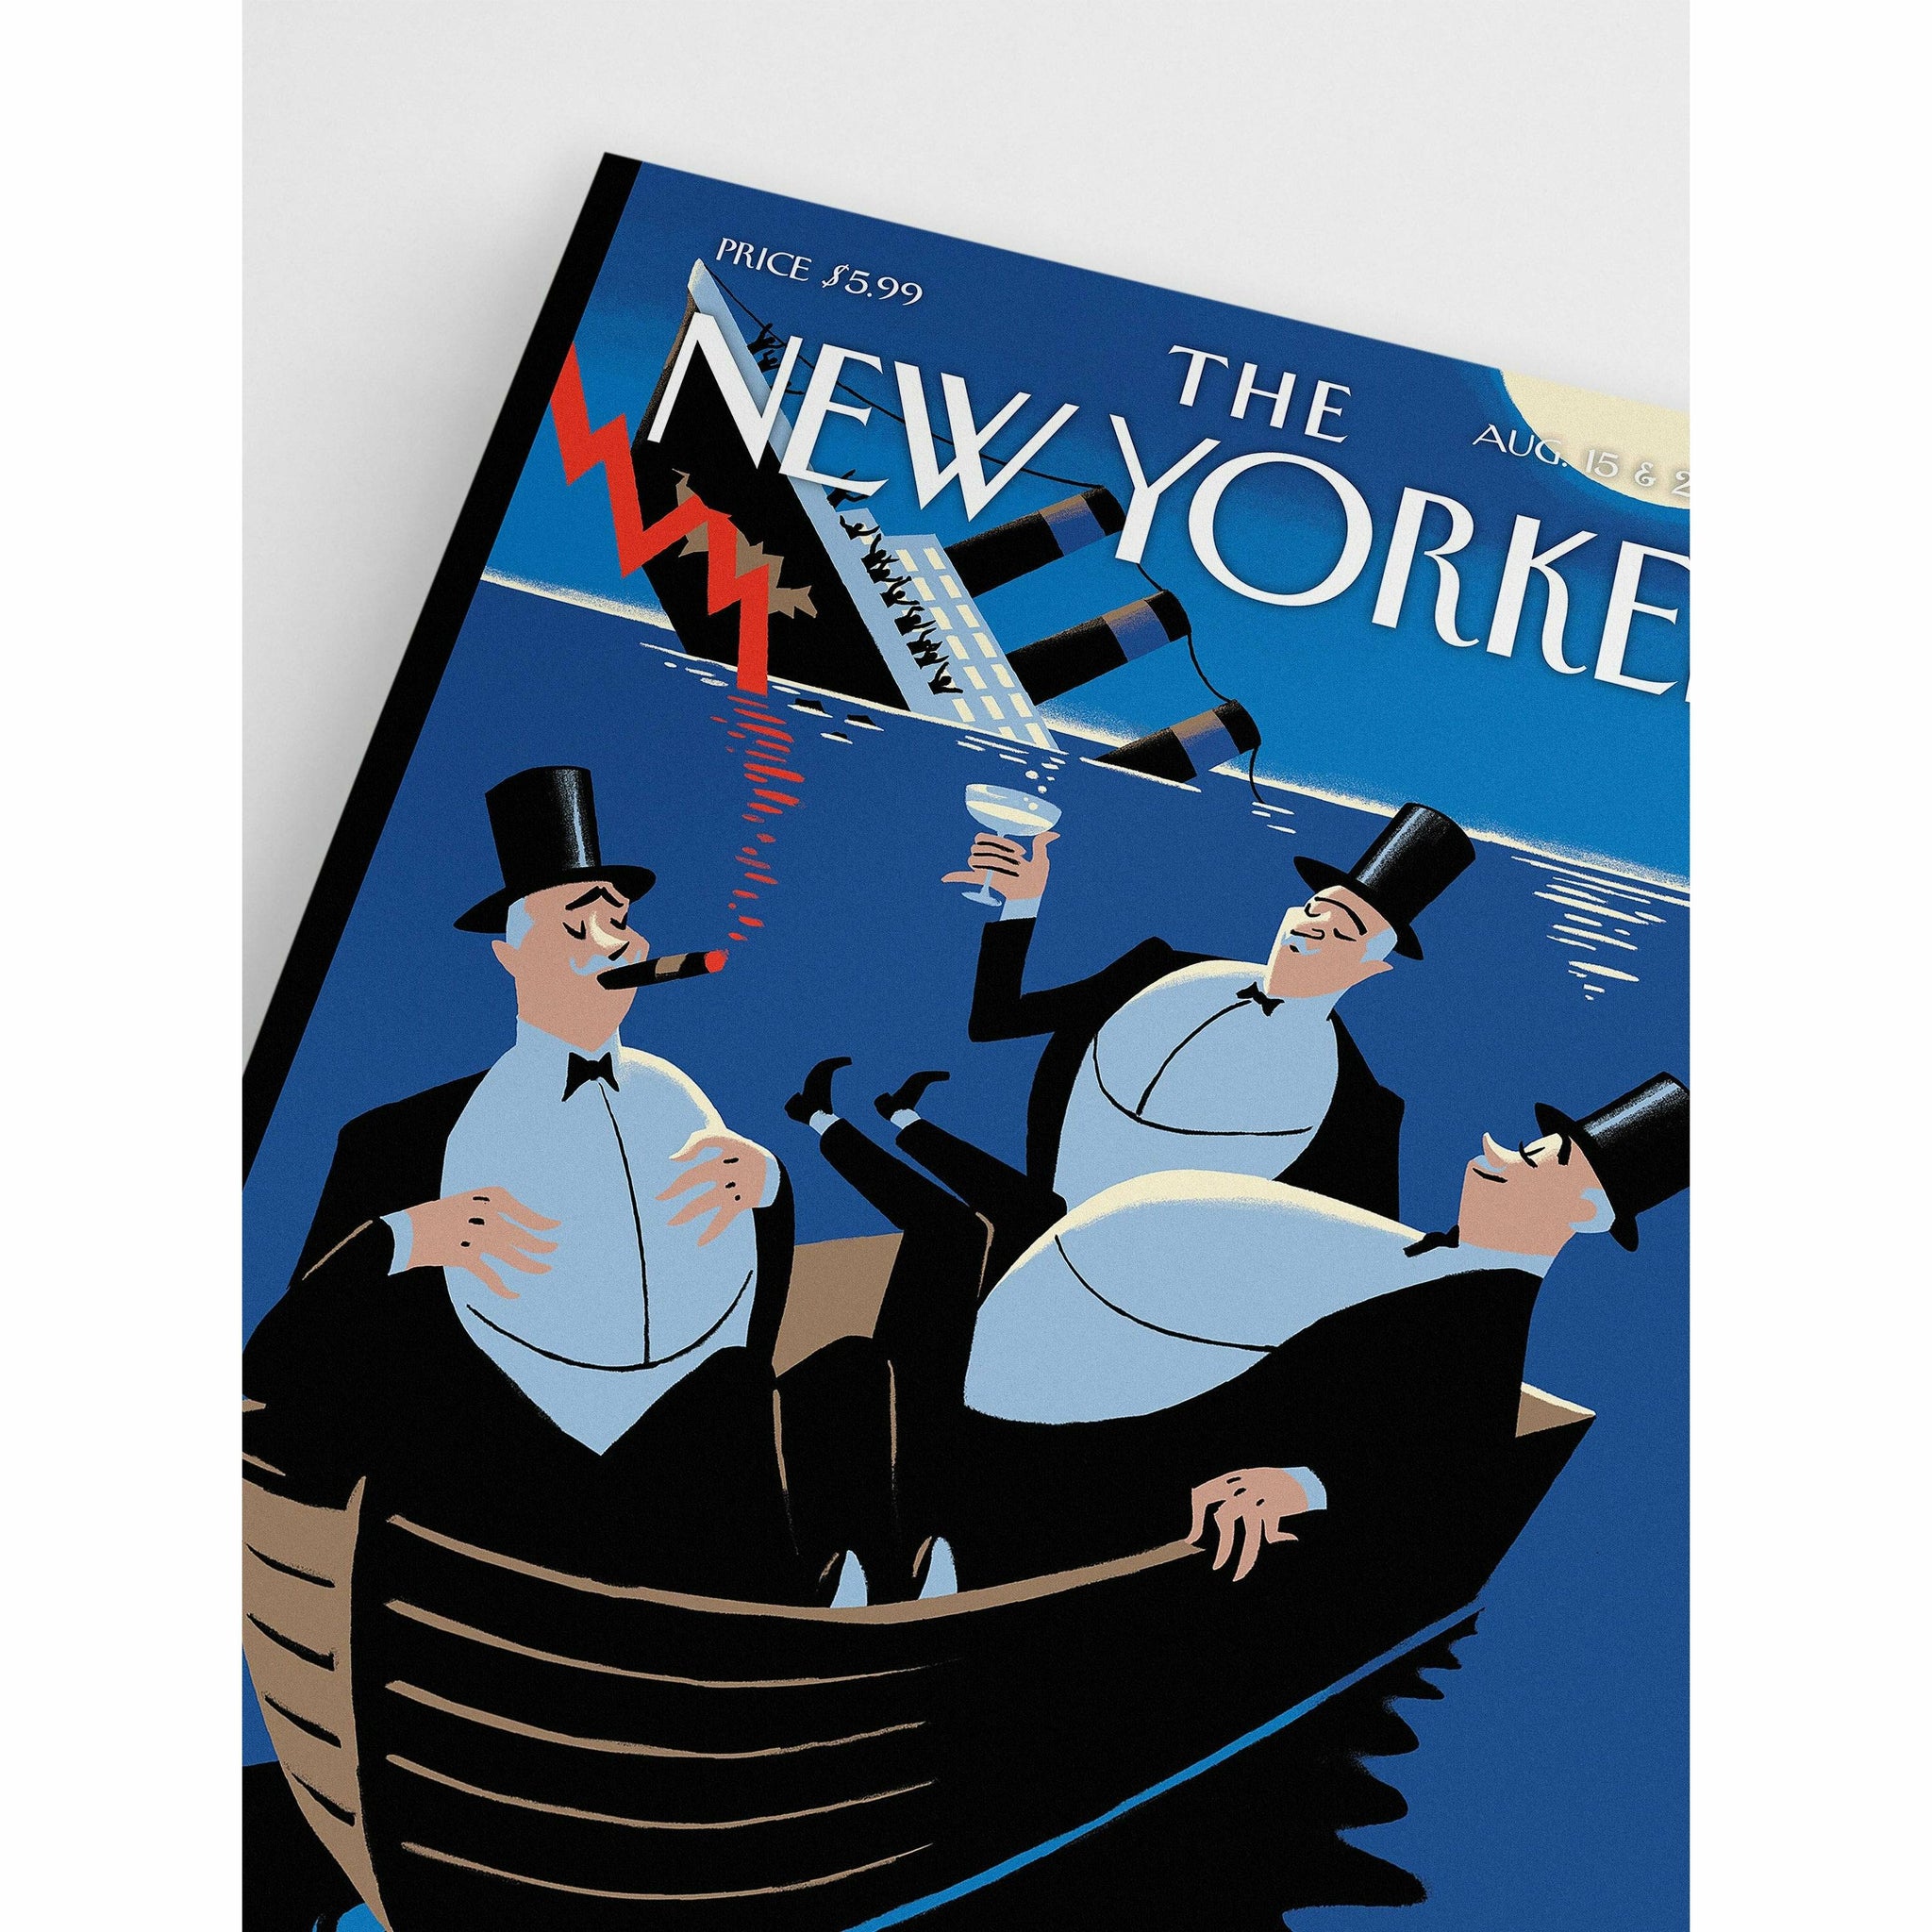 The New Yorker Aug 15, 2011 Poster